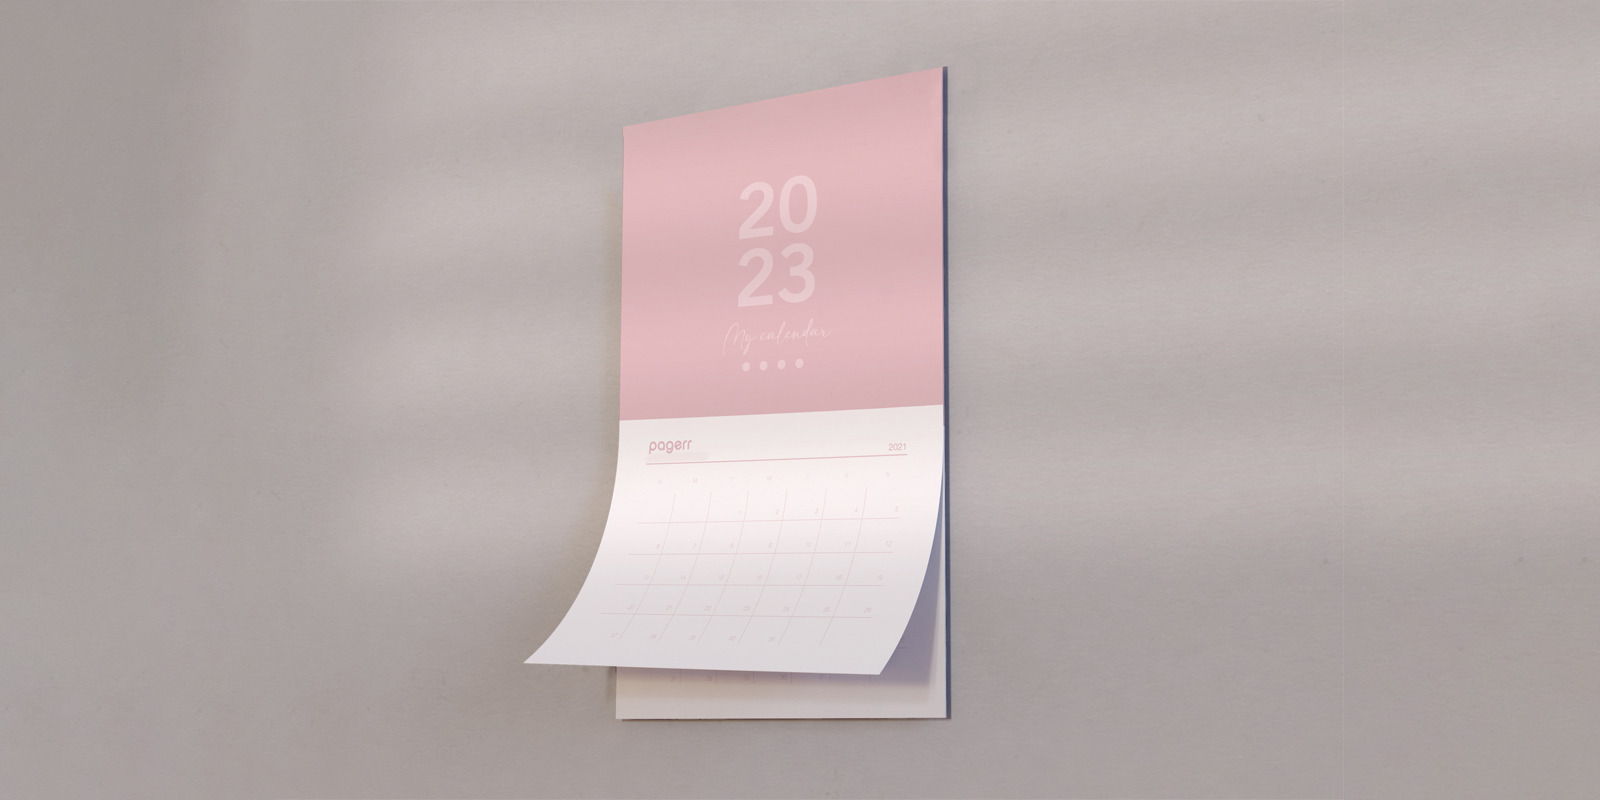 Magnetic calendars in Barcelona - Print with Pagerr